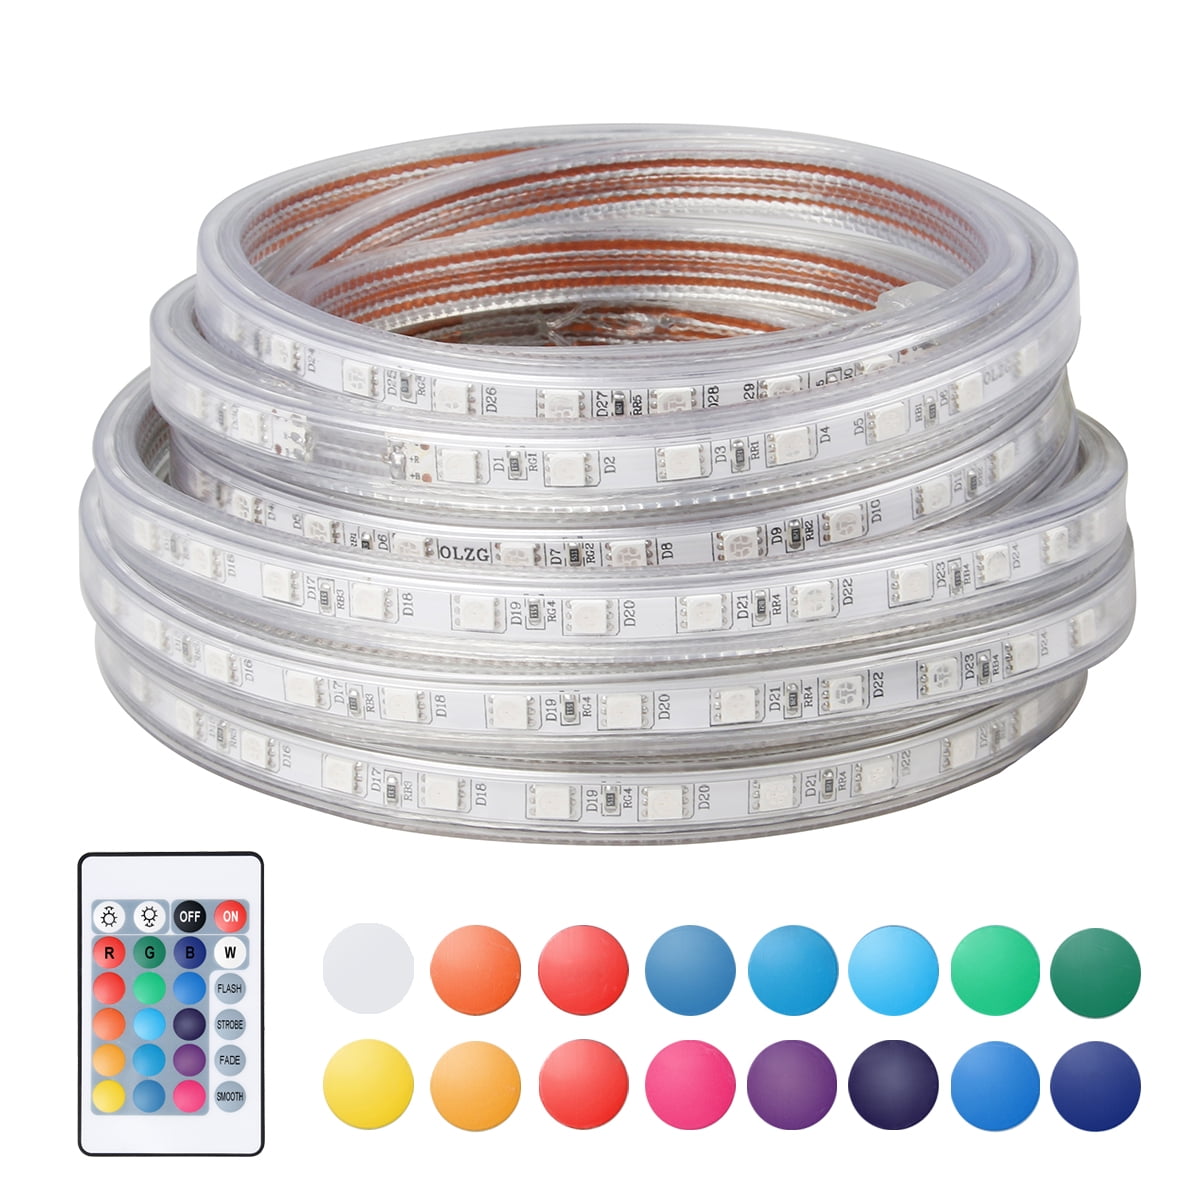 With US Plug 110V 5050 LED Strip Light Flexible Tape Lighting Rope Home Outdoor 